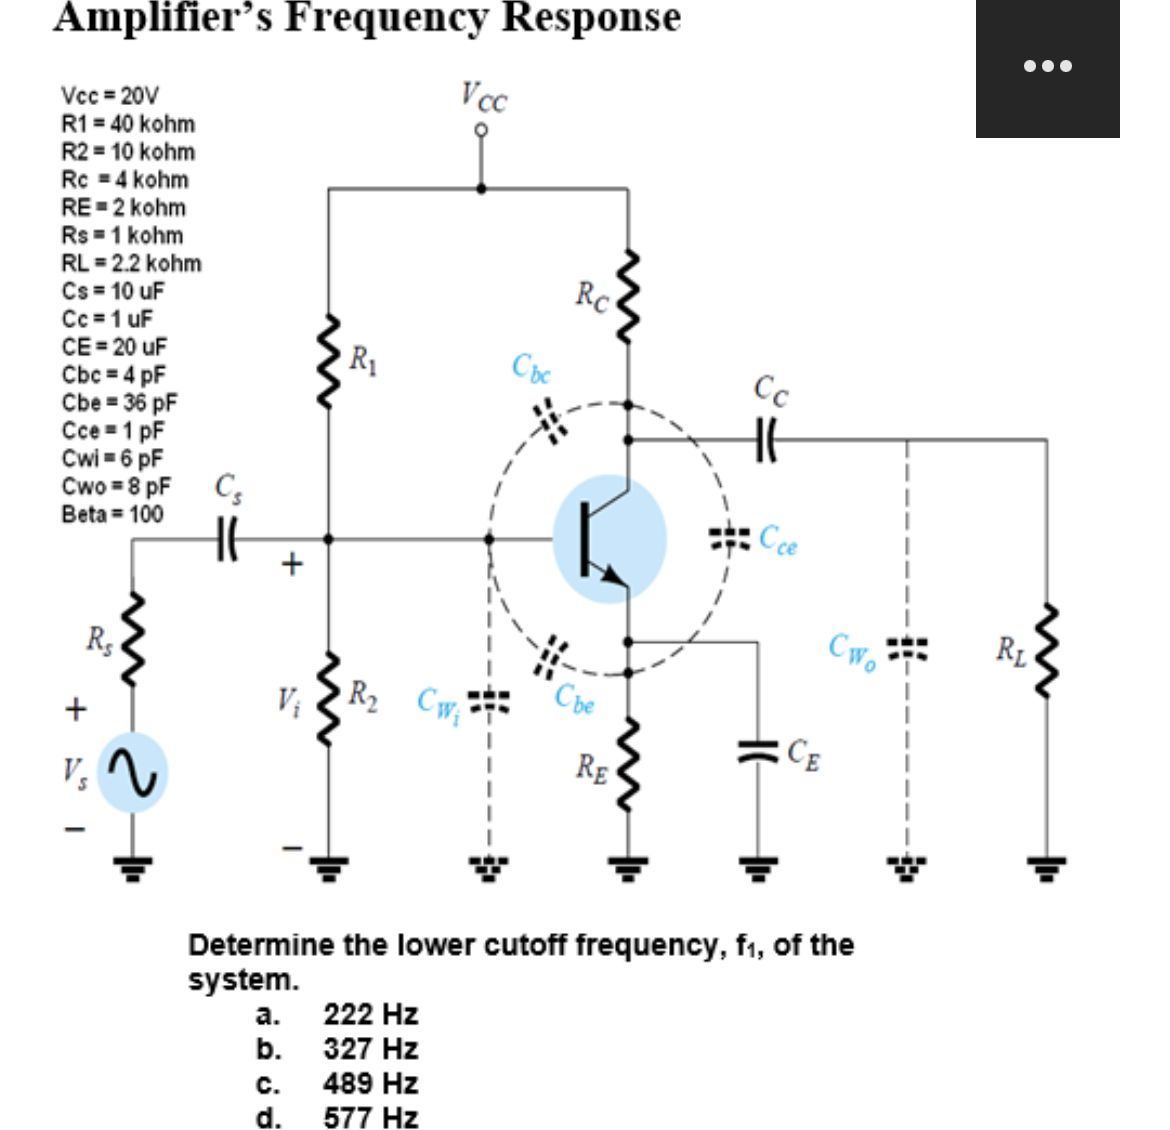 Amplifier's Frequency Response
Vcc=20V
R1 = 40 kohm
R2 = 10 kohm
Rc = 4 kohm
RE=2 kohm
Rs = 1 kohm
RL = 2.2 kohm
Cs = 10 uF
Cc=1 uF
CE = 20 uF
Cbc = 4 pF
Cbe = 36 pF
Cce=1 pF
Cwi=6 pF
Cwo = 8 pF
Beta = 100
Re
Vs
Cs
+
a.
b.
R₁
C.
d.
Vcc
R₂ CW₁
222 Hz
327 Hz
489 Hz
577 Hz
Cbc
Rc
Che
RE
Cc
Cce
Determine the lower cutoff frequency, f₁, of the
system.
CE
Cwo
●●●
RL